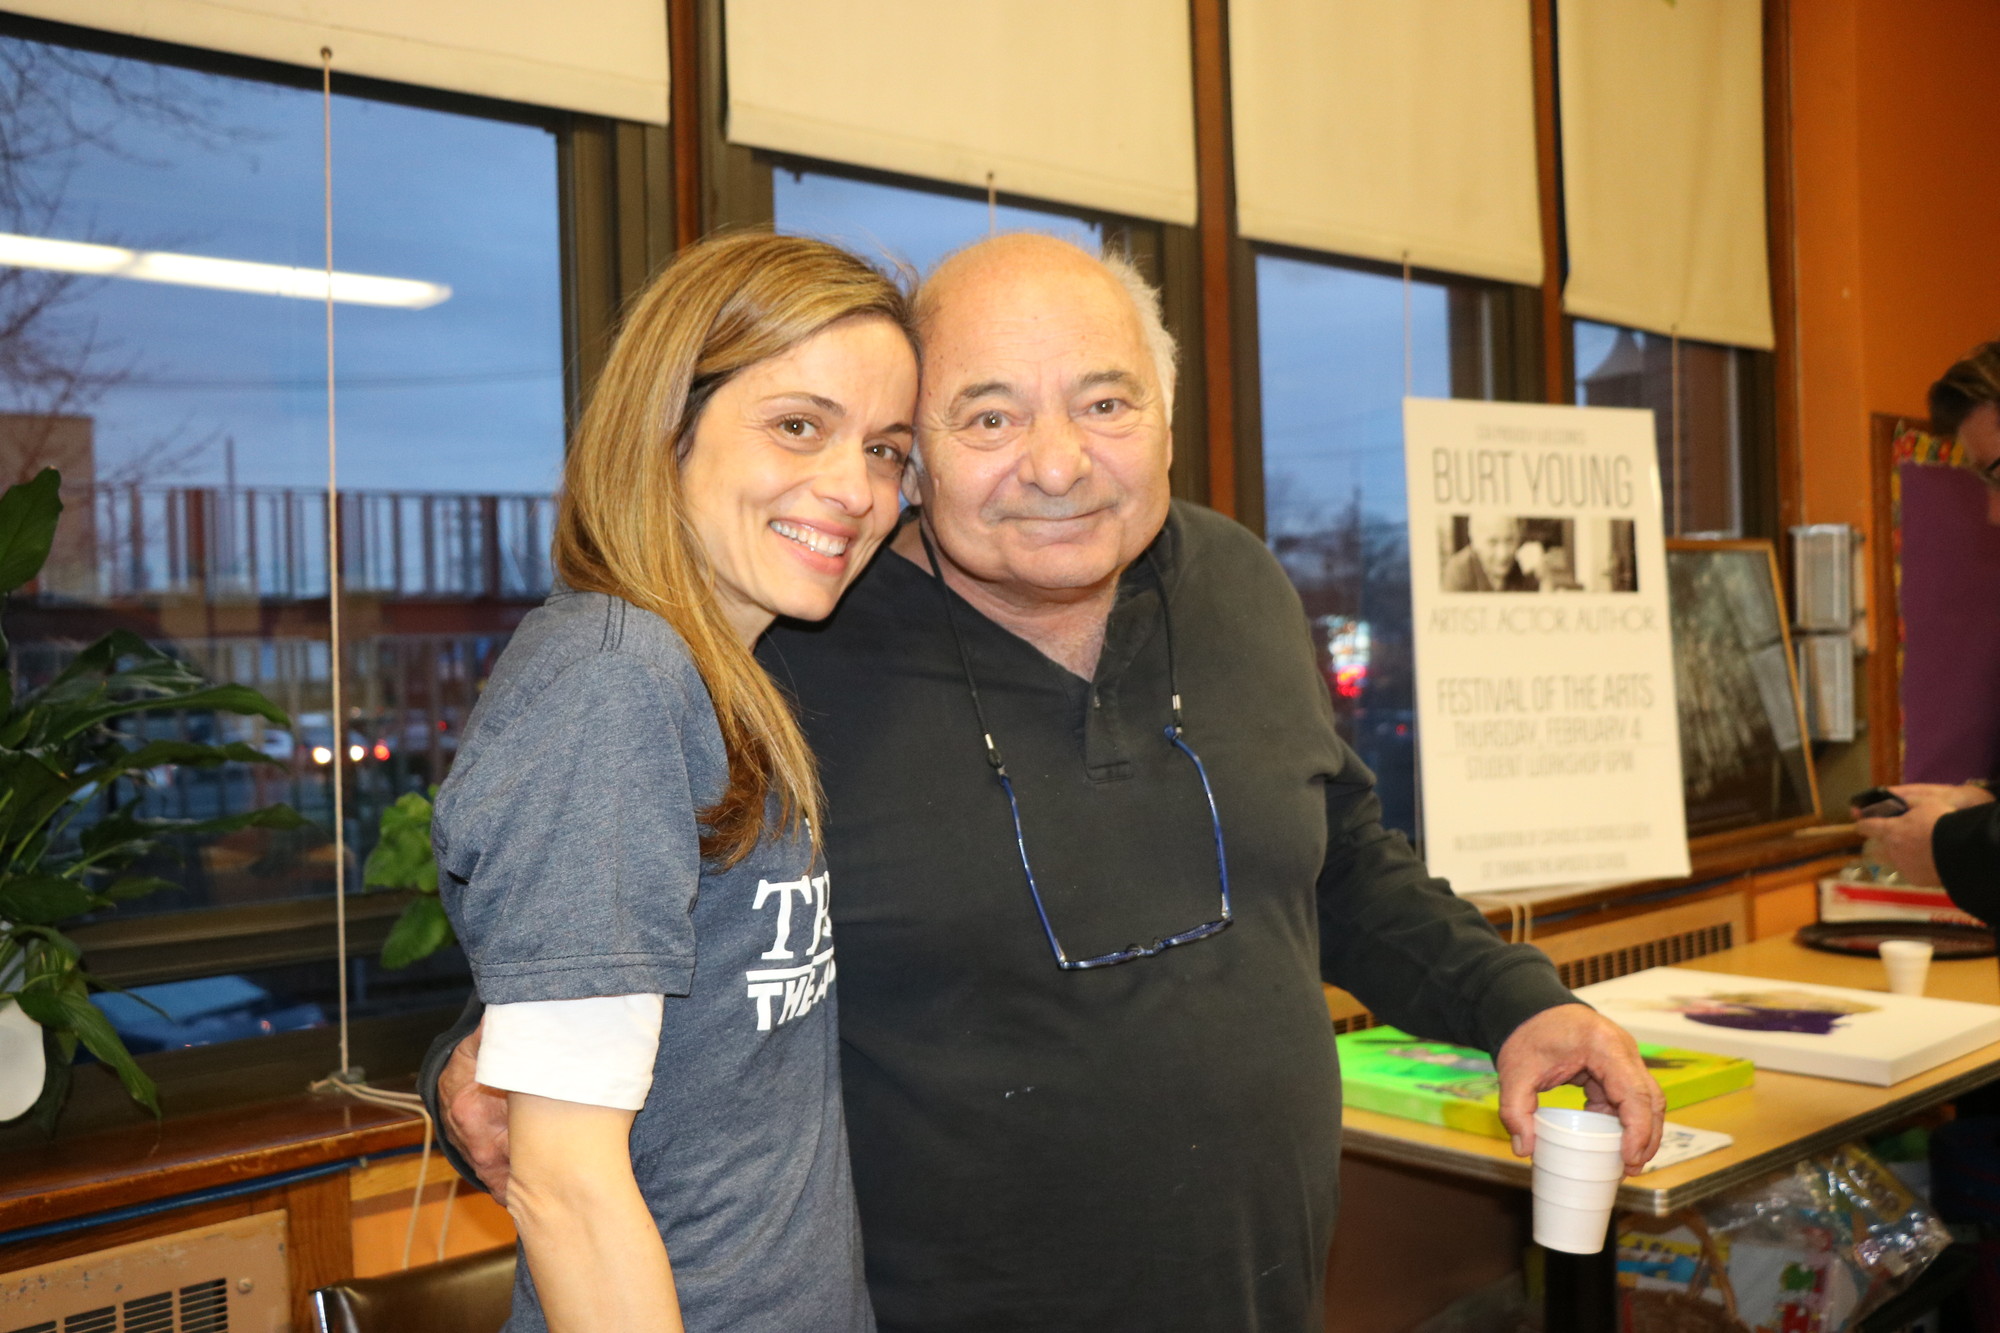 Actor Burt Young with St. Thomas the Apostle teacher Daniela Picone at a painting event at the school on Feb. 4.